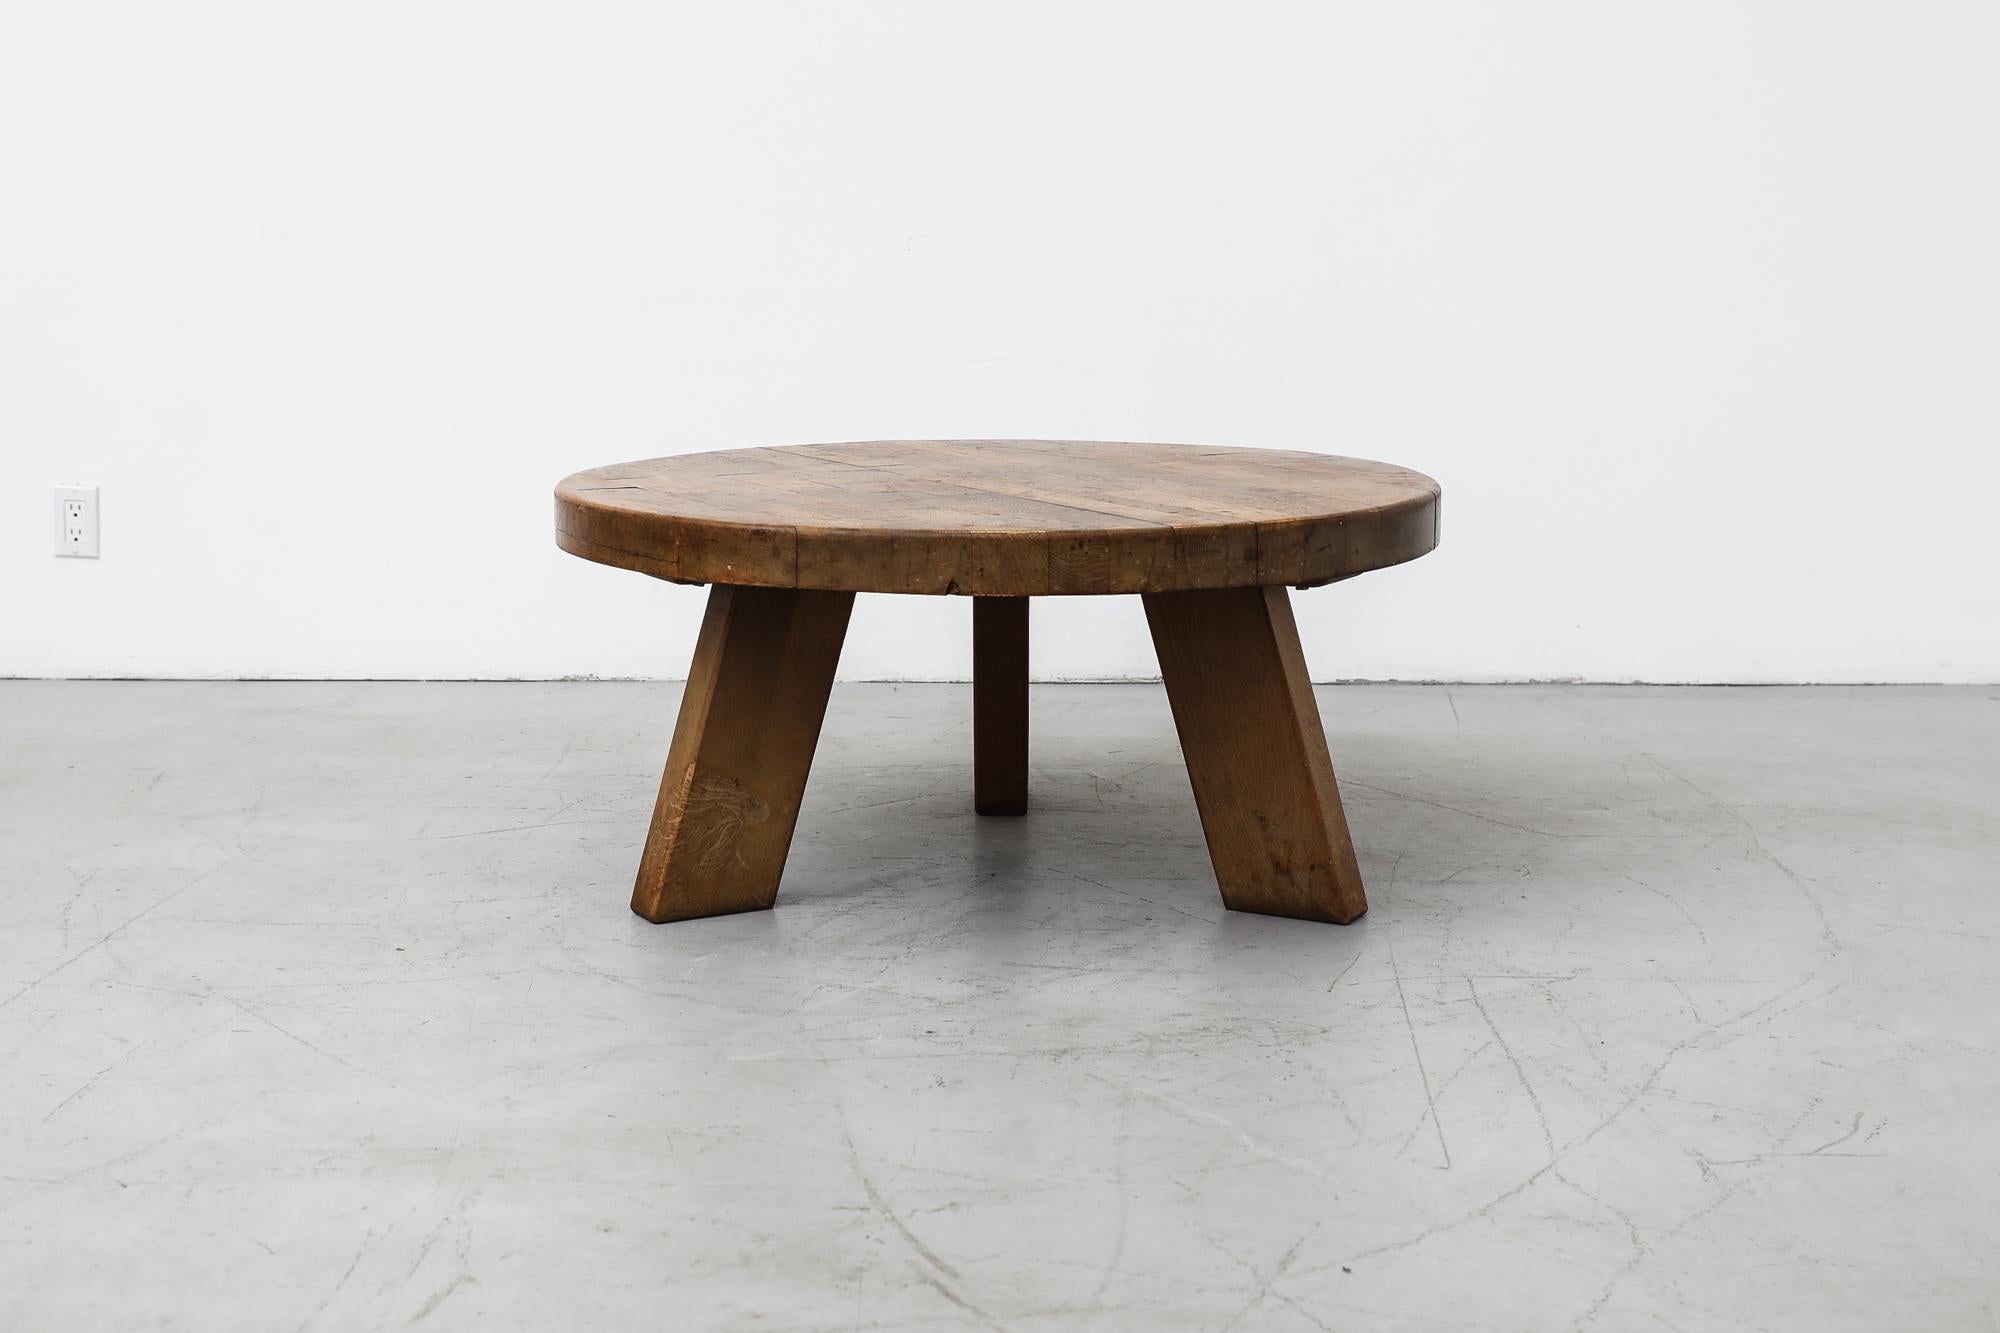 Heavy round Mid-Century Brutalist coffee or side table made from solid oak with three sturdy legs. In original condition with visible wear and patina consistent with its age and use. Similar tables also available and listed separately.